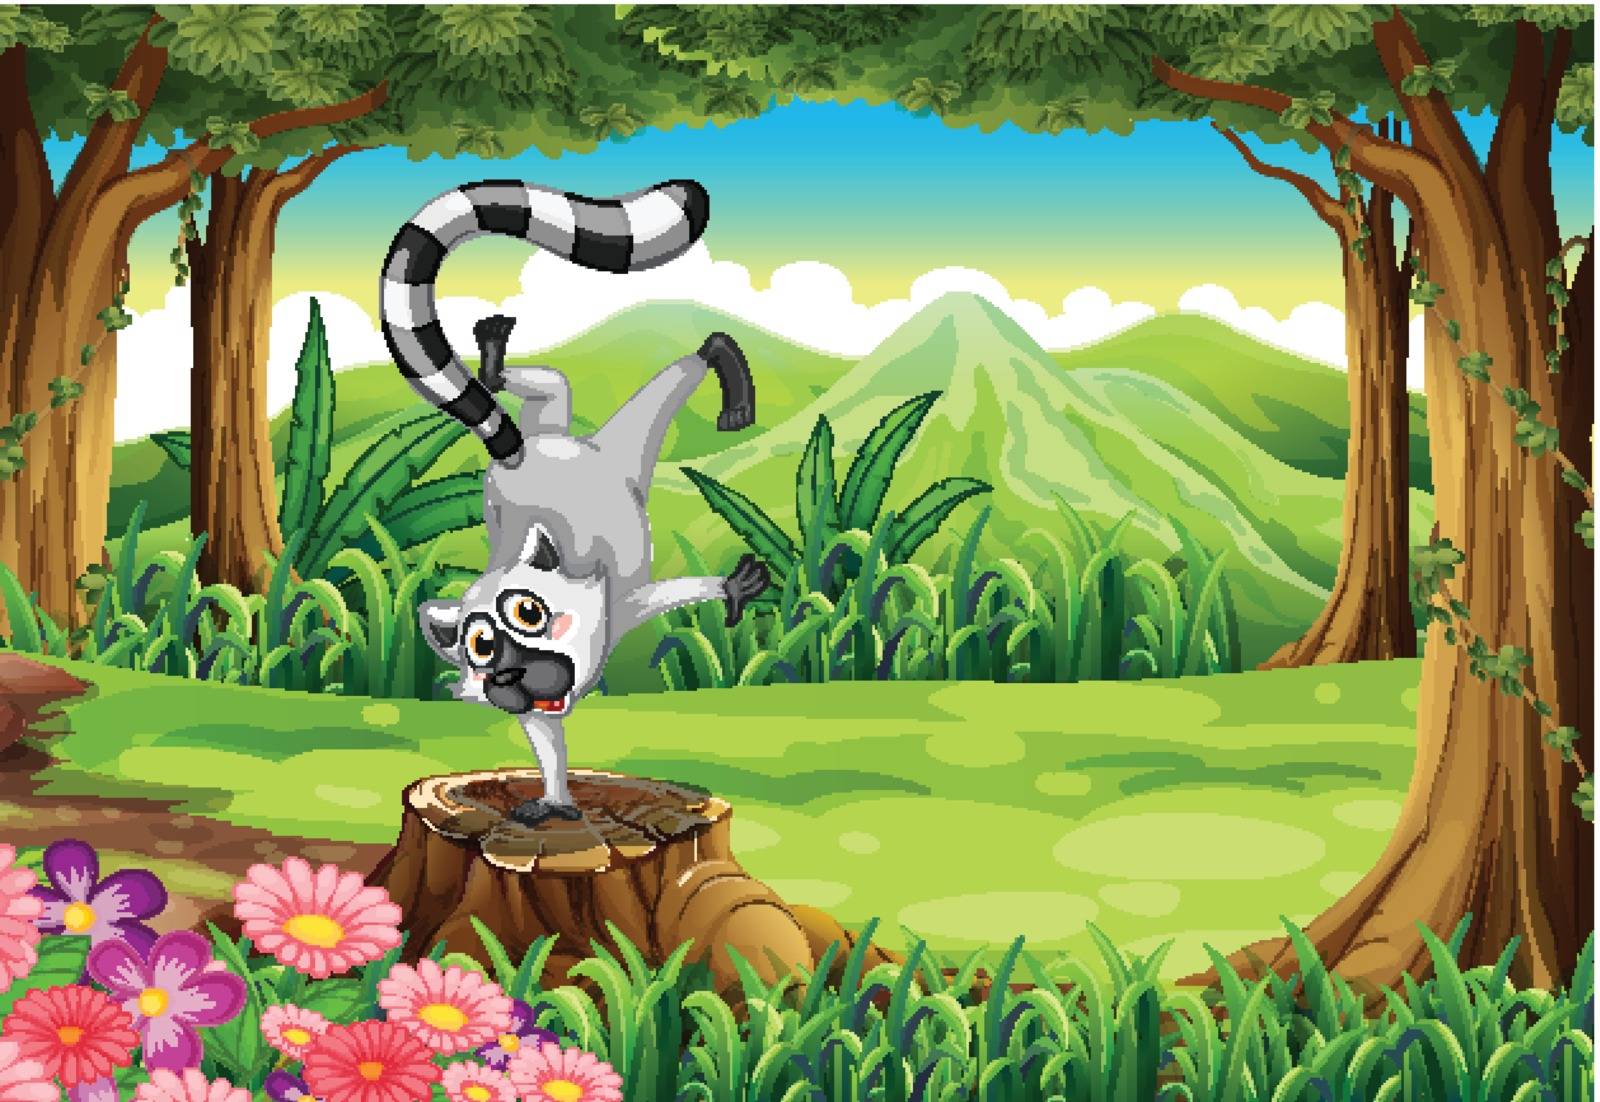 Illustration of a wild lemur at the forest